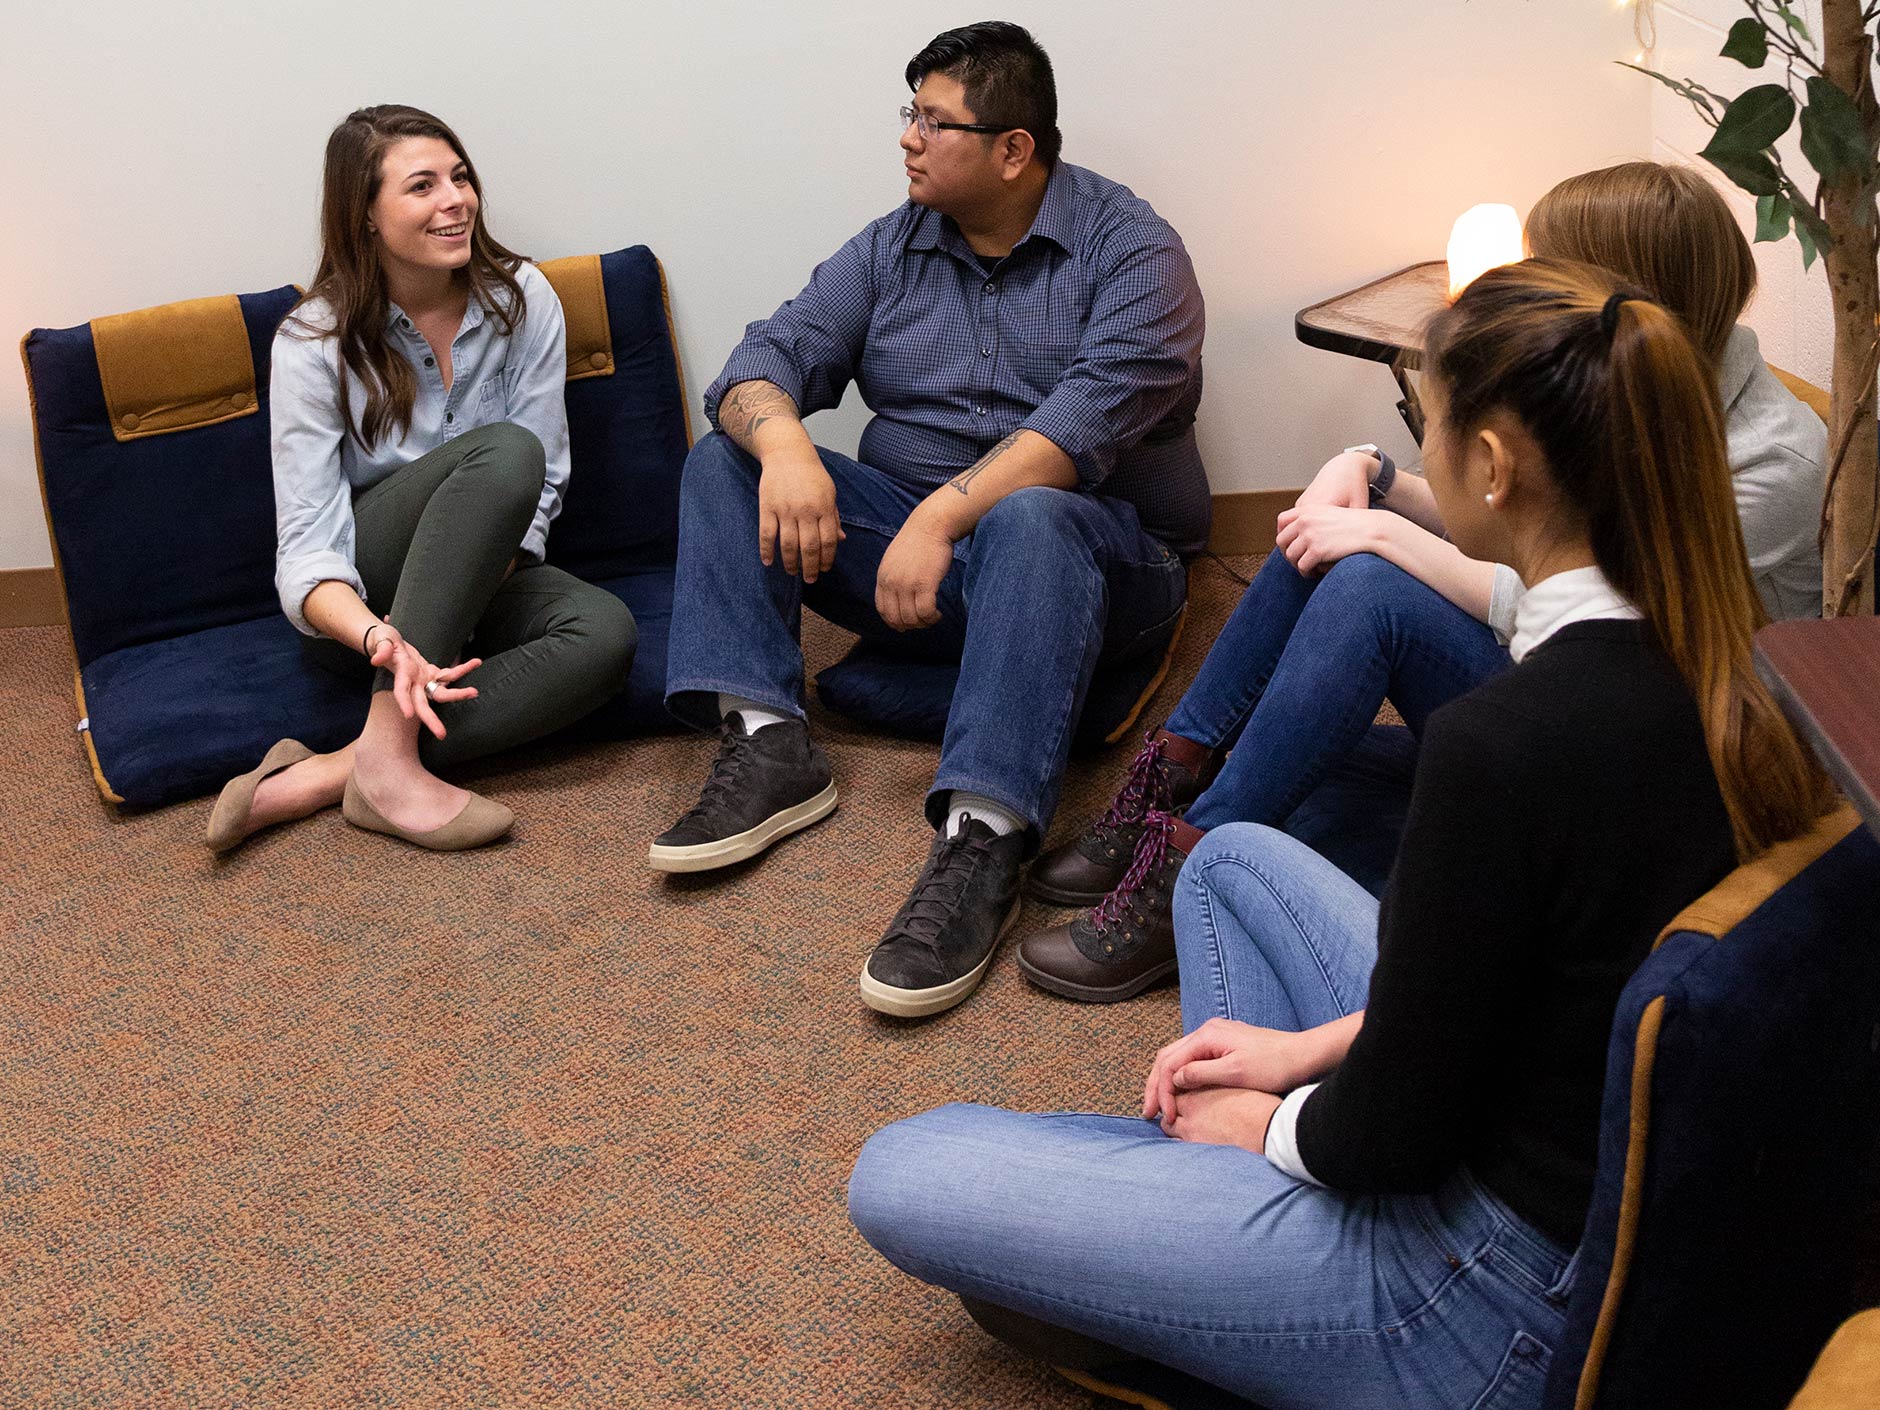 Four students sitting on the floor having a discussion